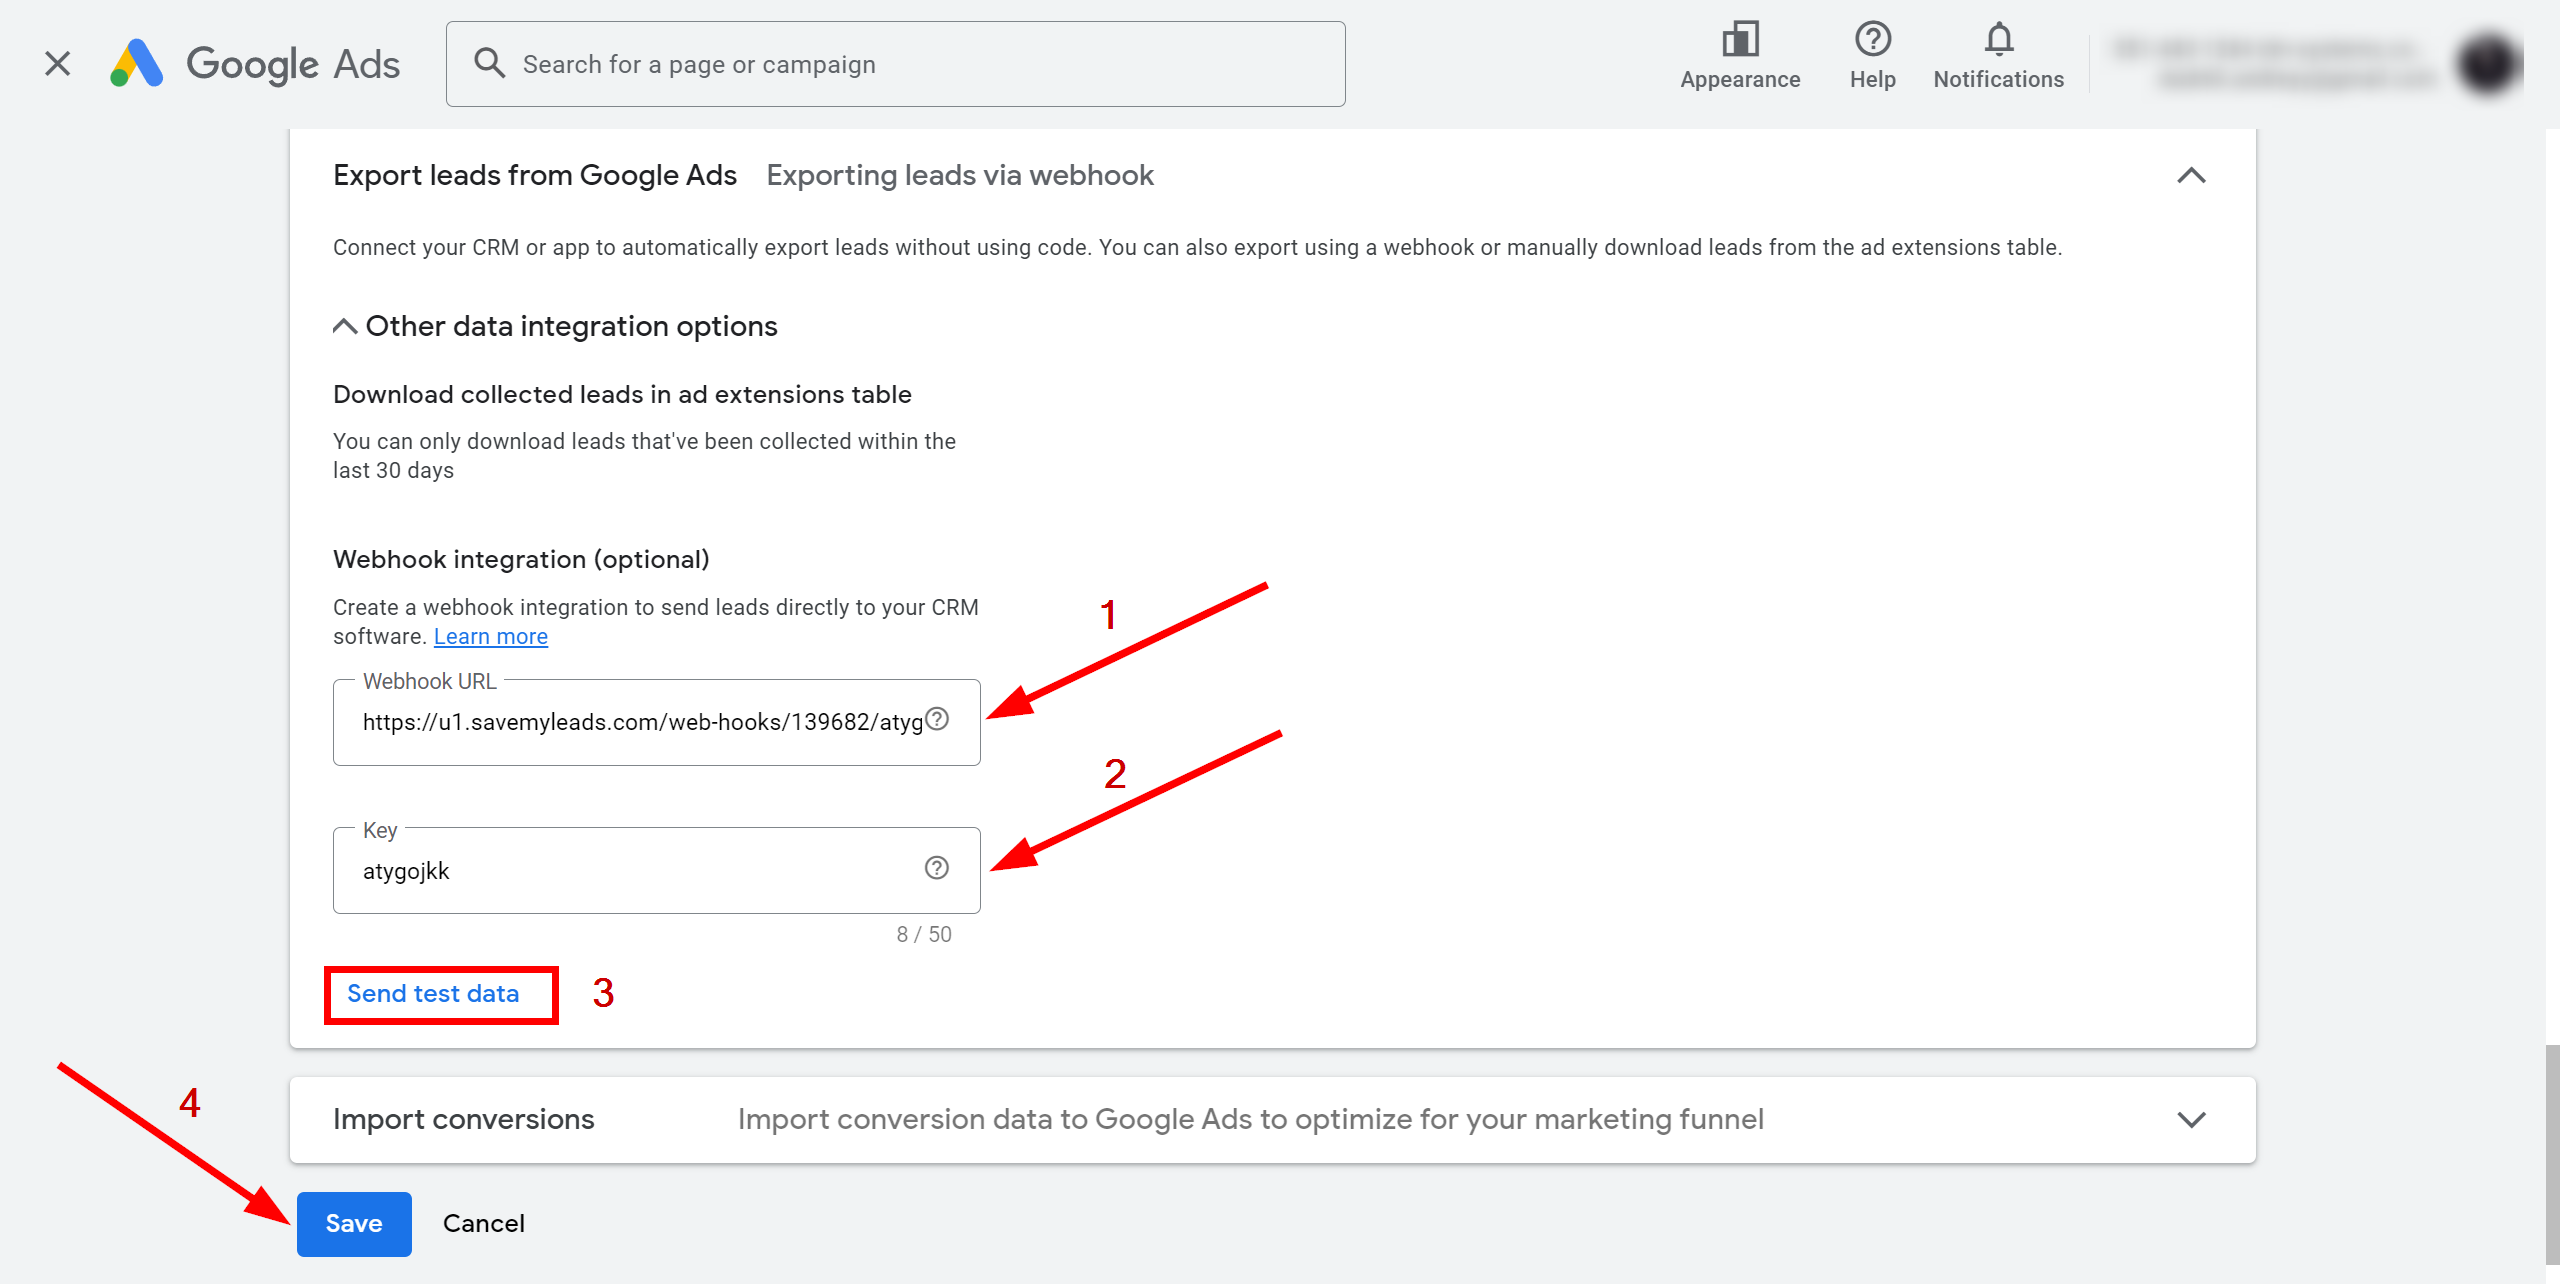 How to Connect Google Lead Form with TextMagic | Data Source account connection